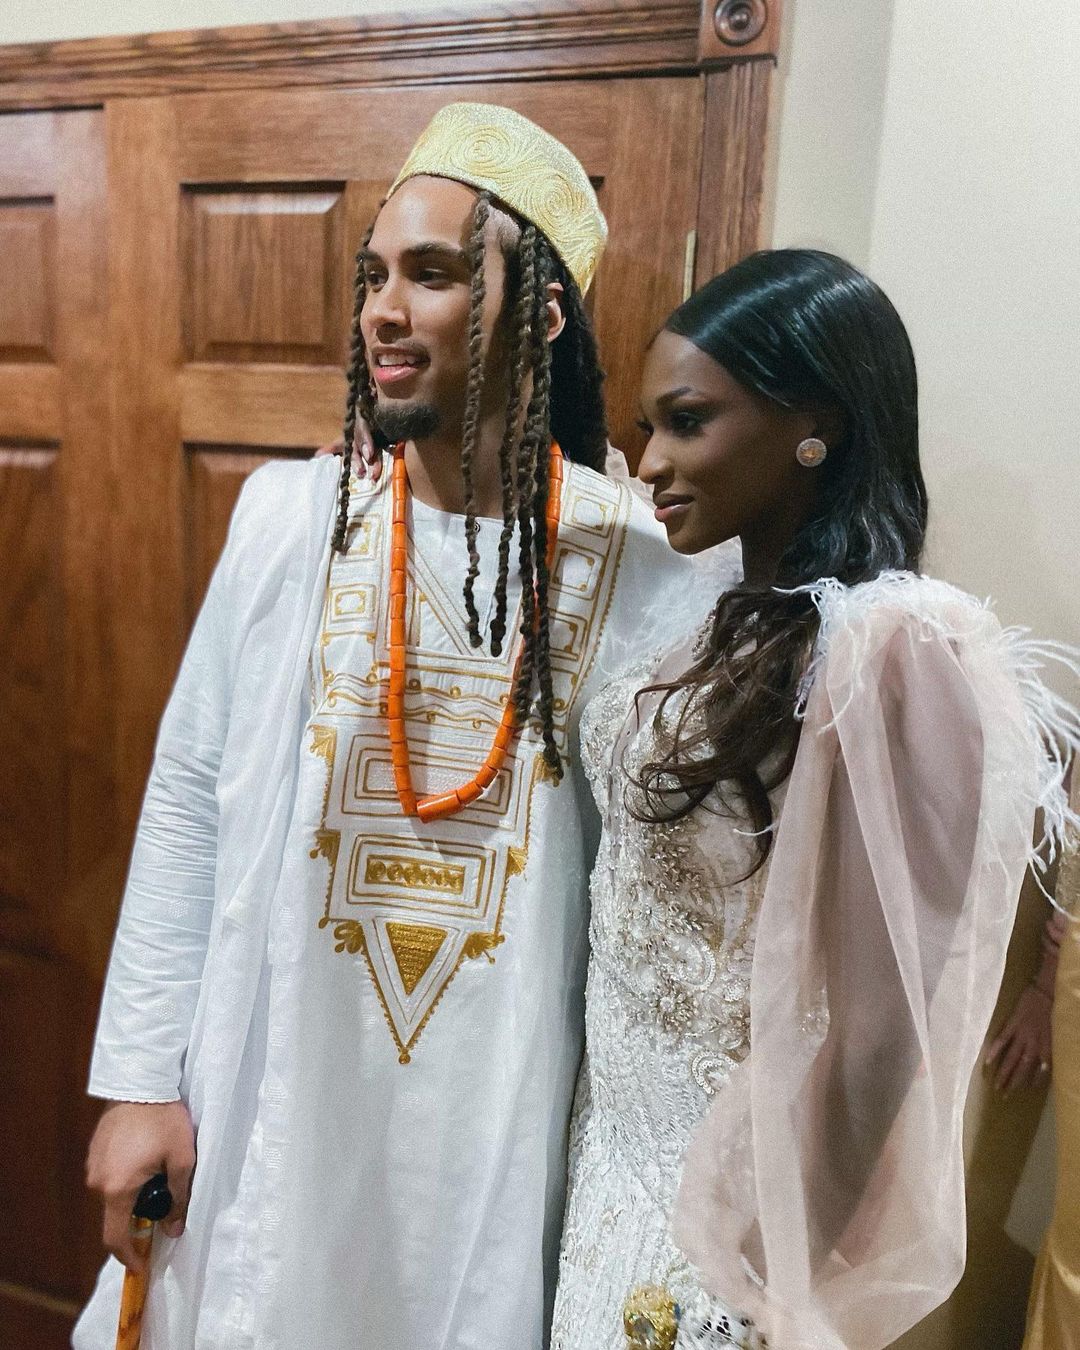 MTV’s Are You the One? Stars Clinton Moxam and Uche Nwosu Beautiful Chicago Wedding